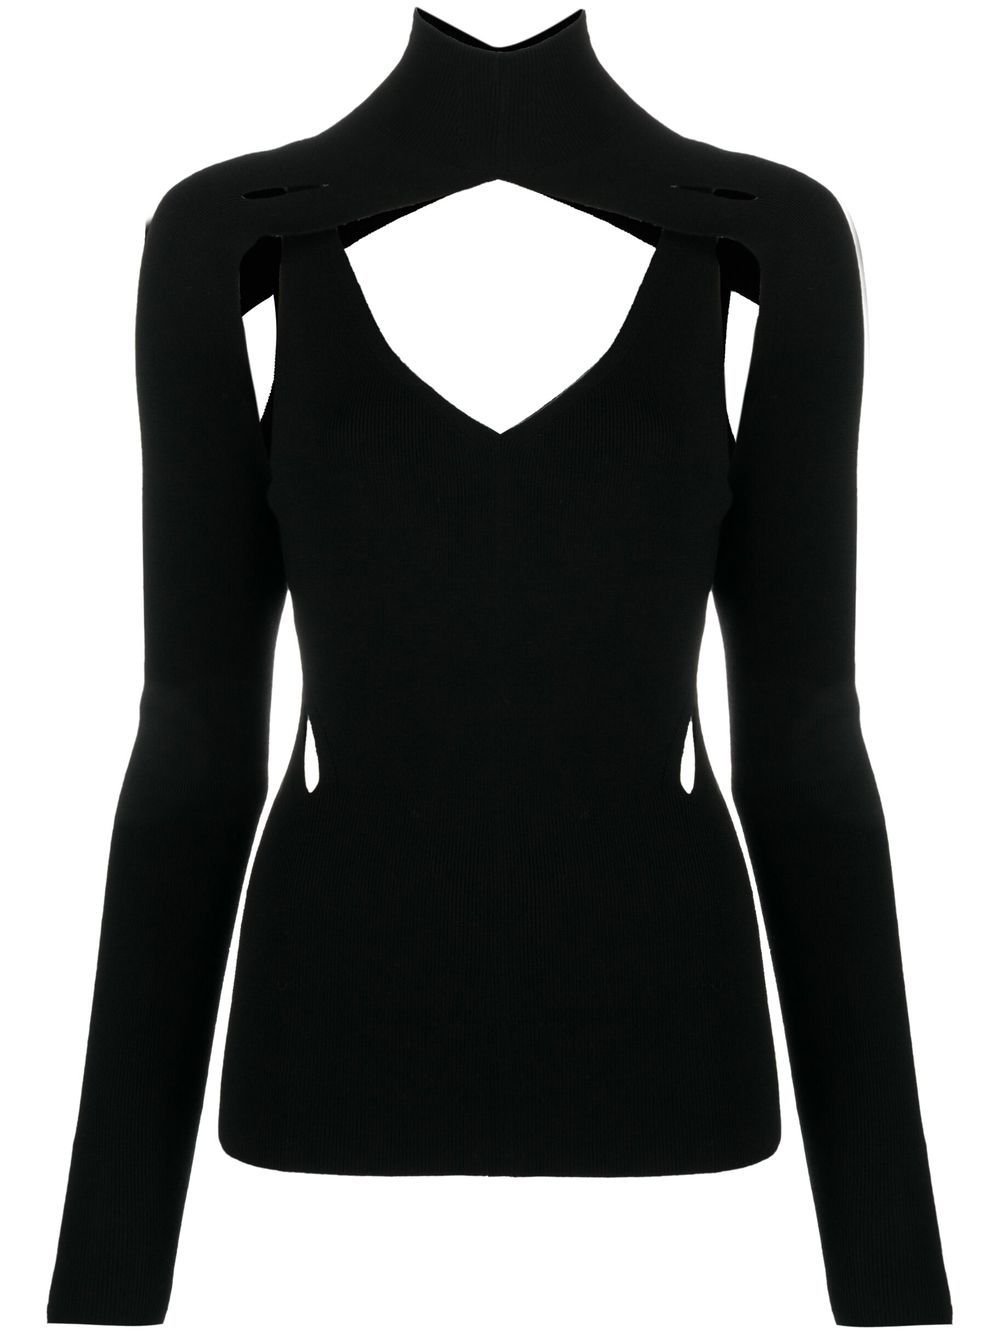 Dion Lee cut-out detail knitted top - Black